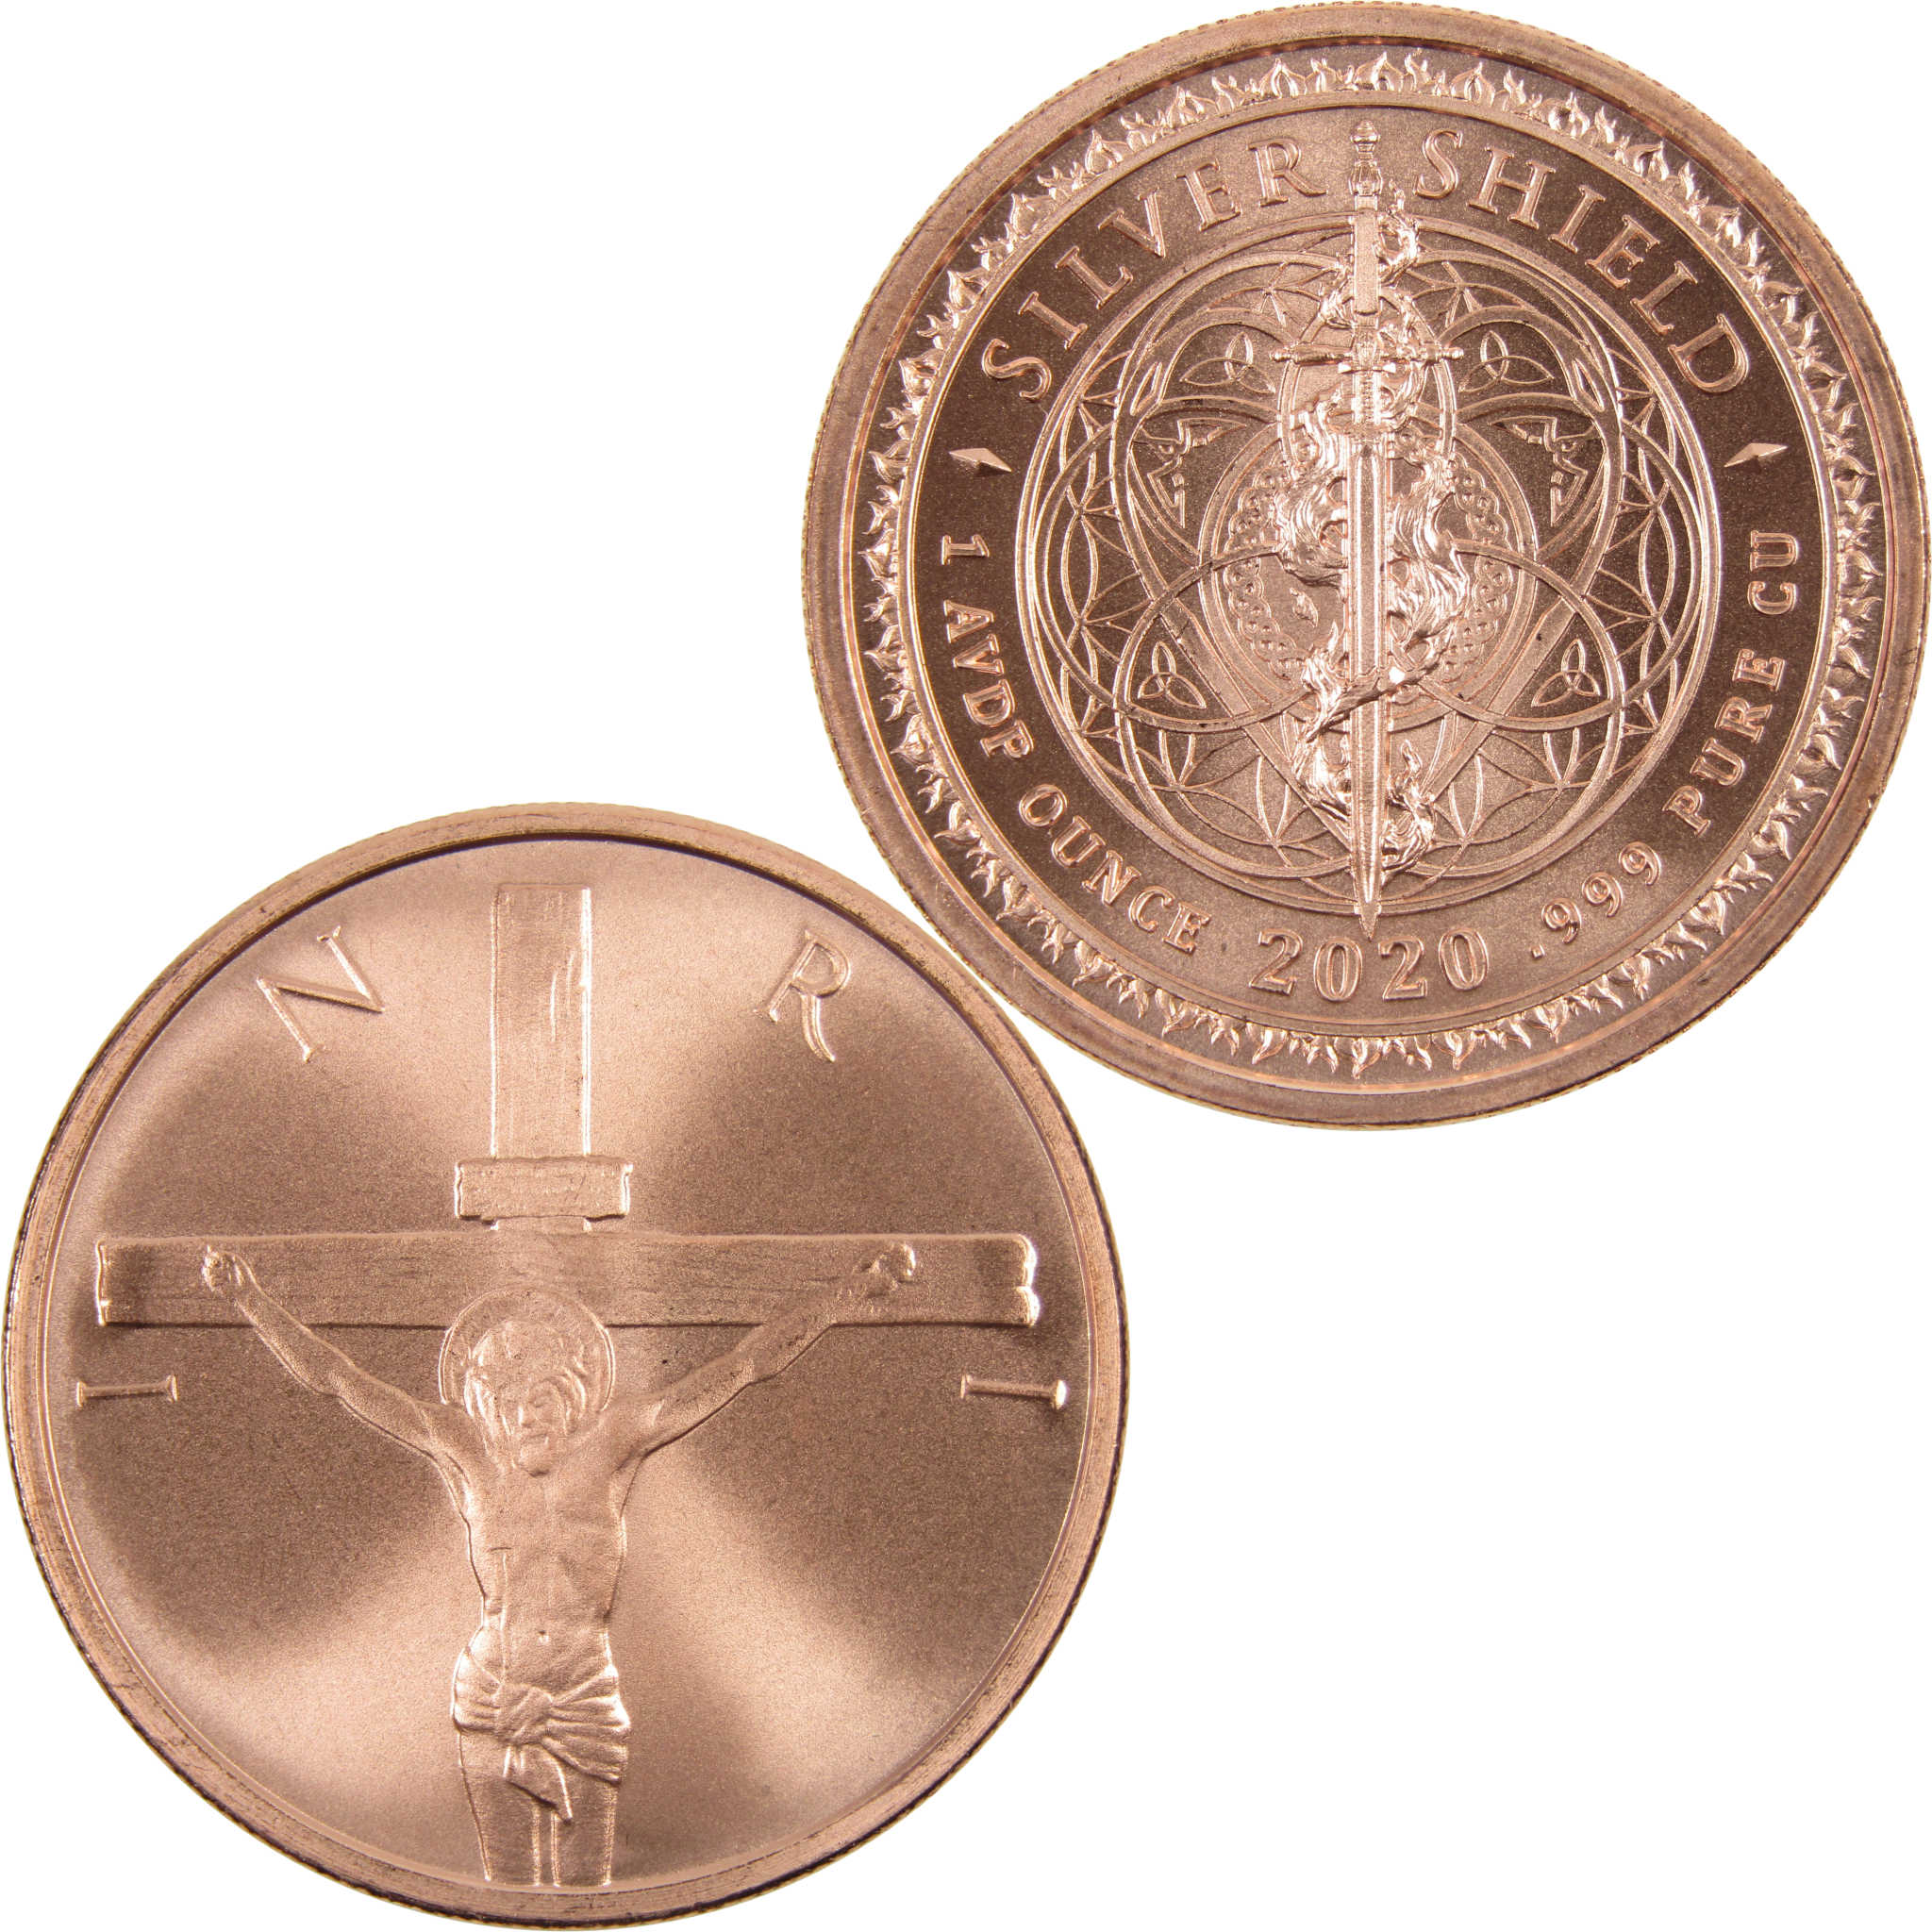 Crucifixion of Christ 1 oz .999 Copper Round Holiday Collectible 2020